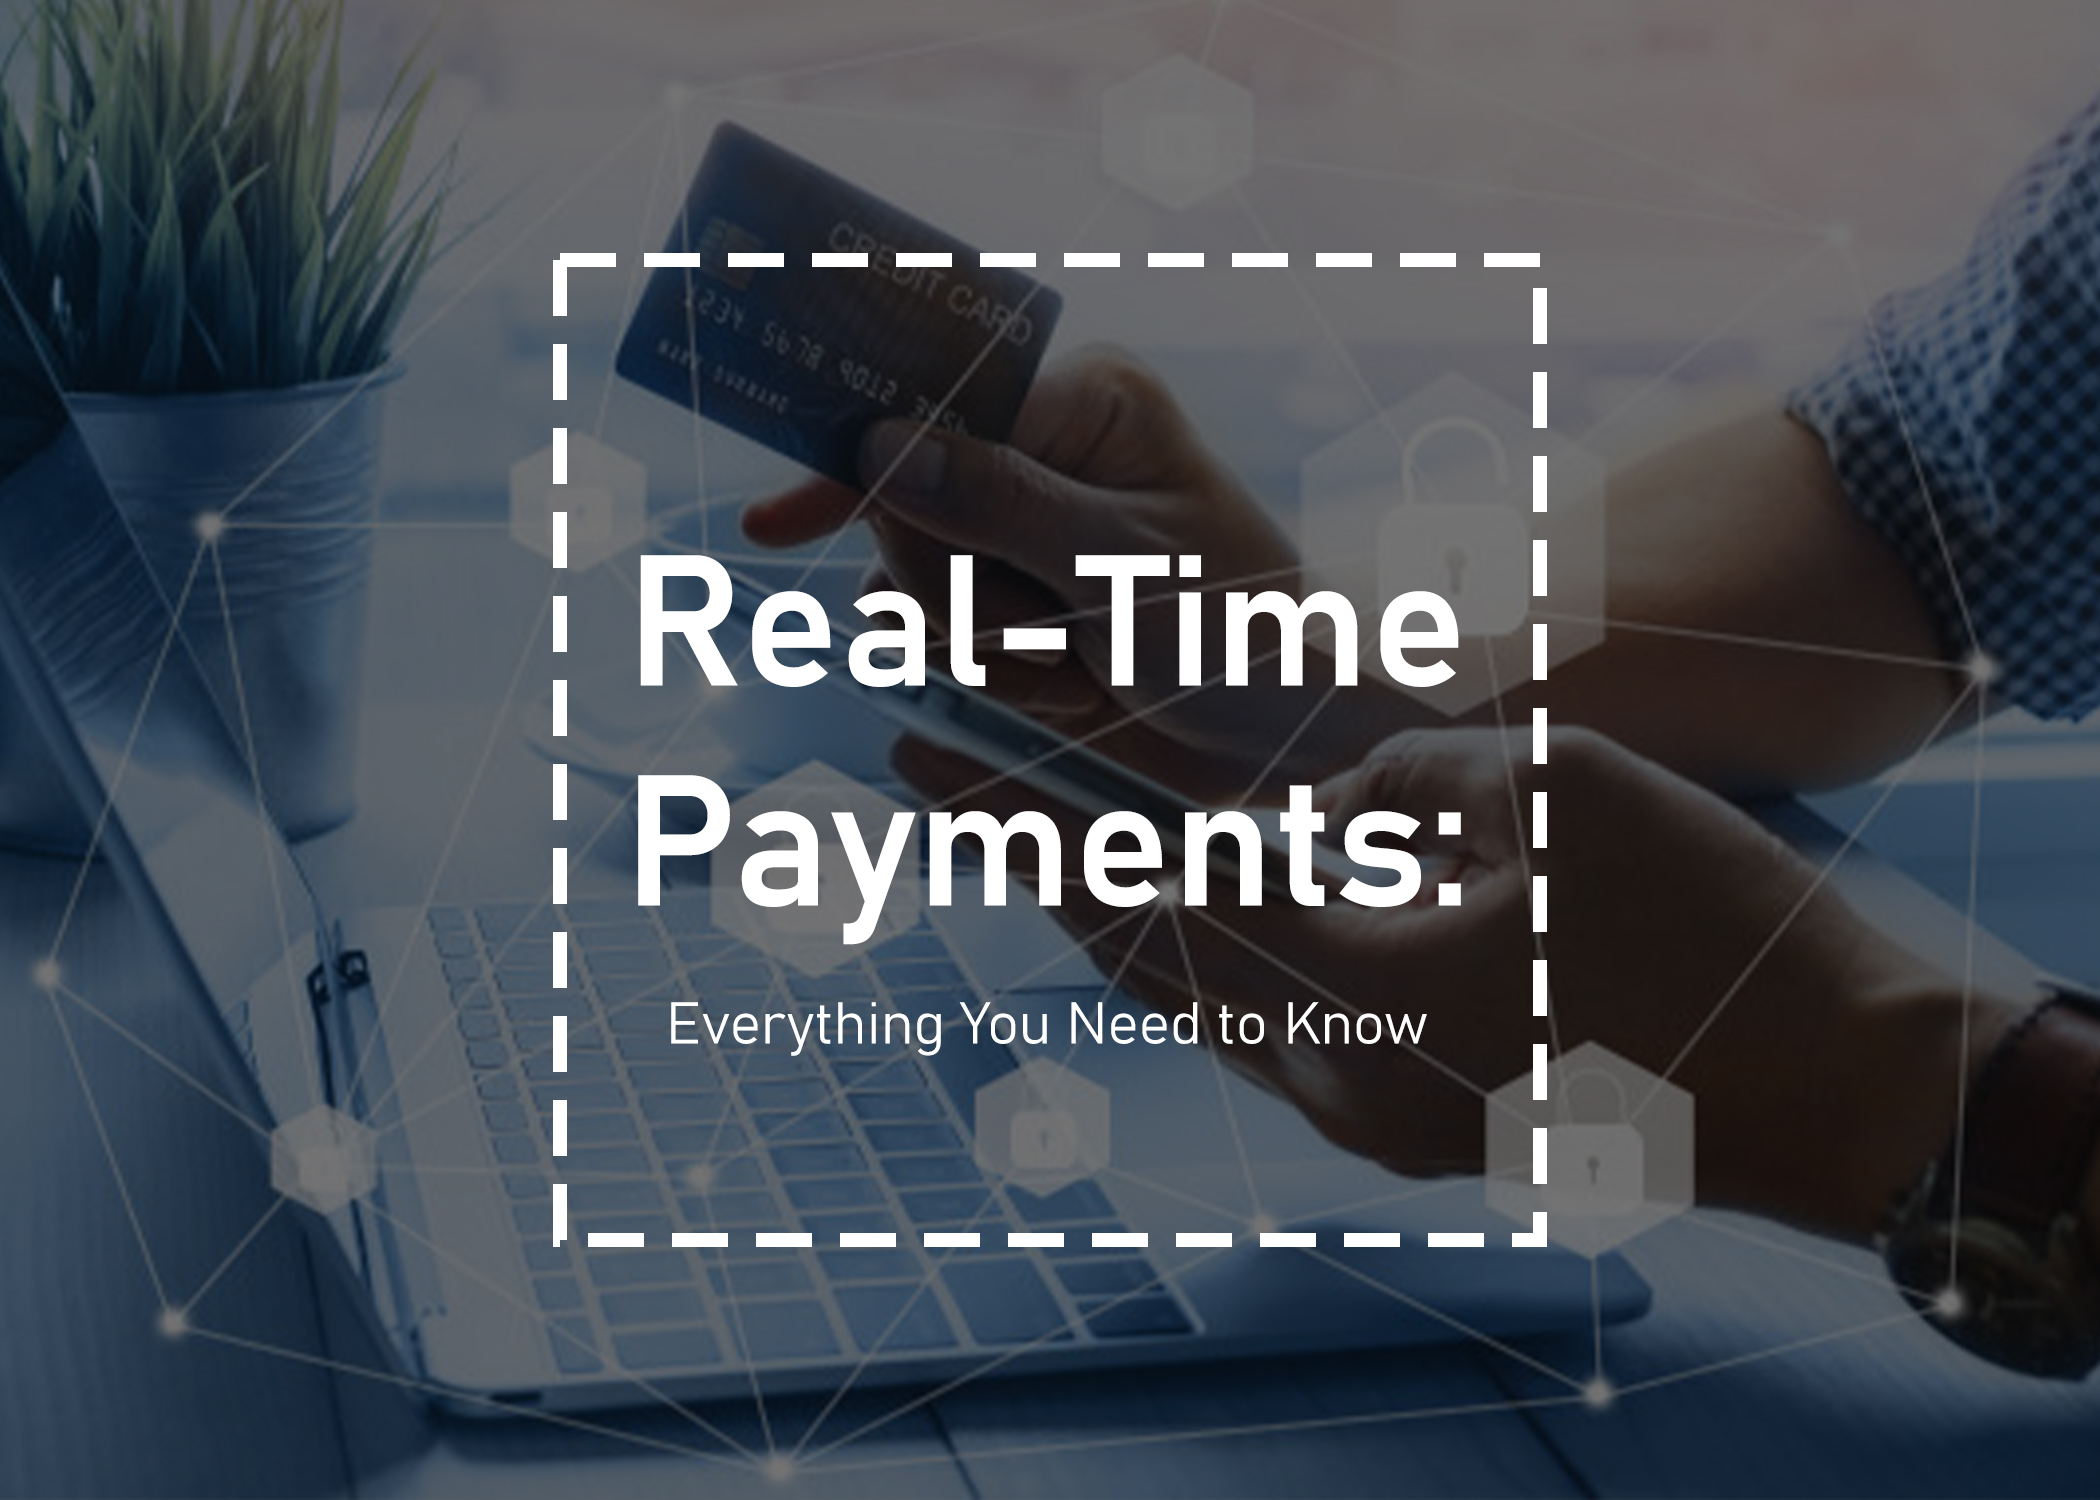 Real-Time Payments: Everything You Need to Know